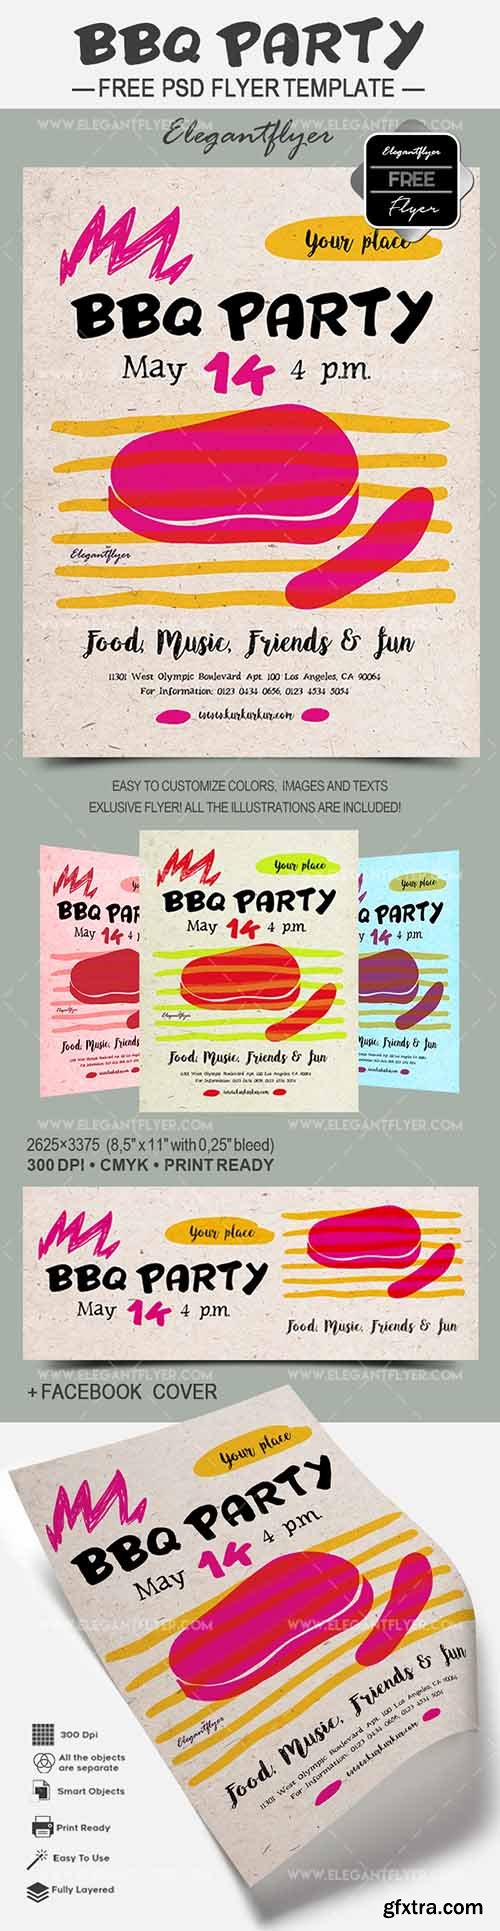 BBQ Party – Free Flyer PSD Template + Facebook Cover